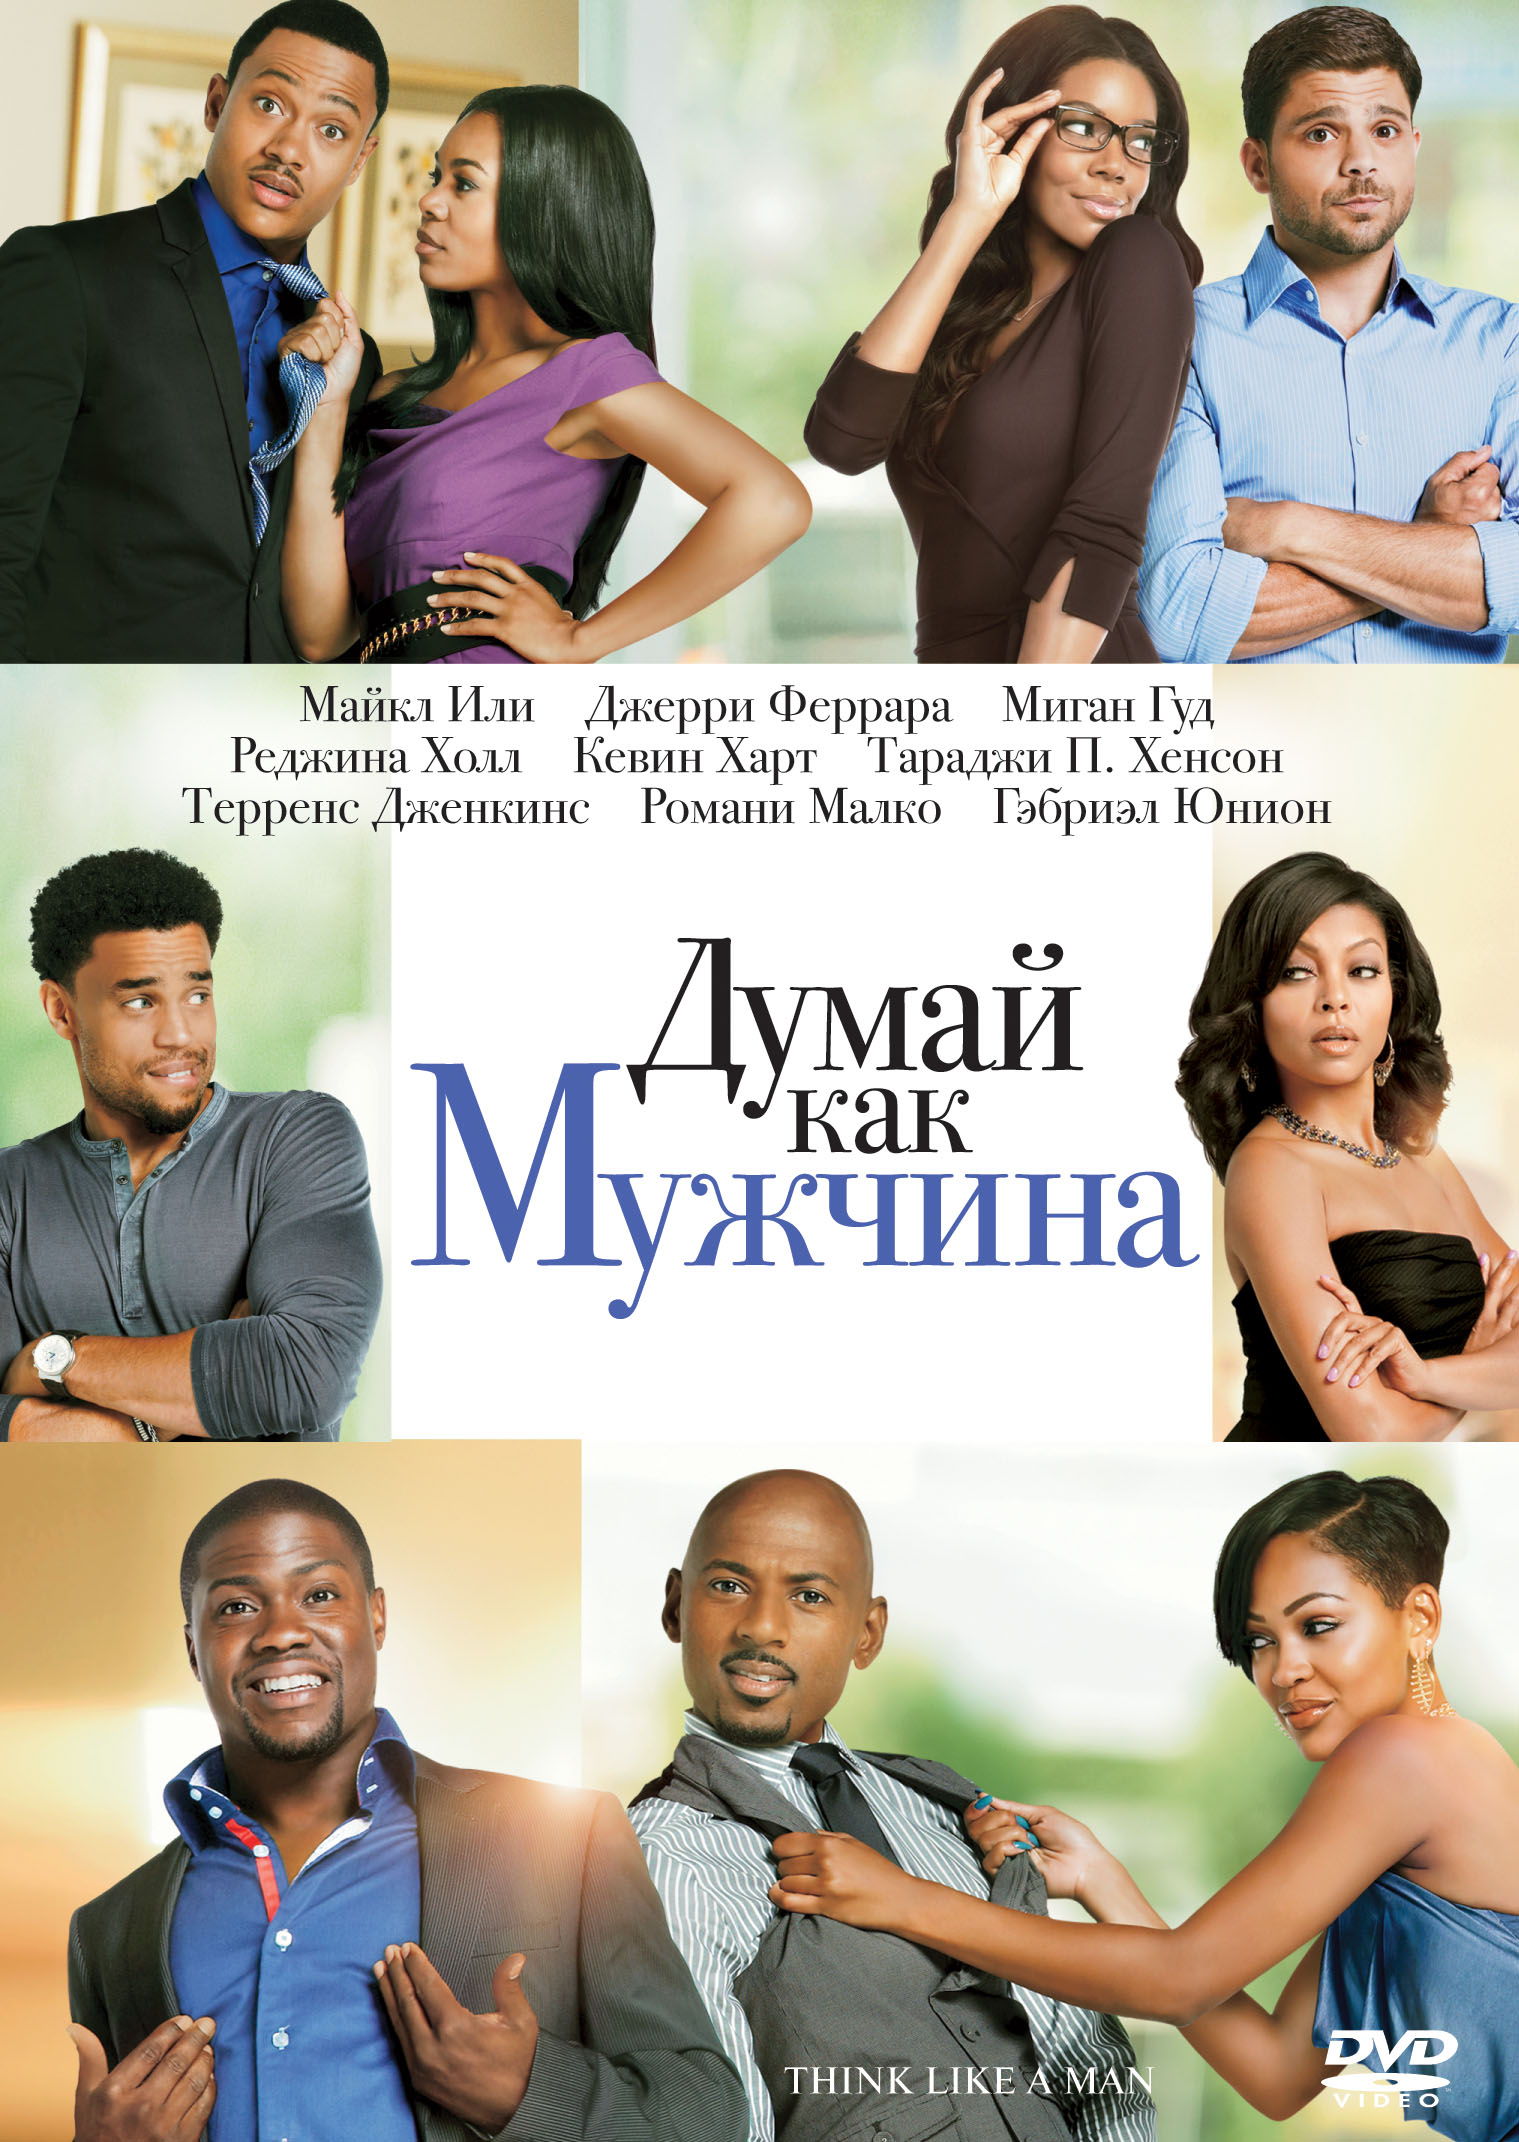 Think Like A Man Movie Online